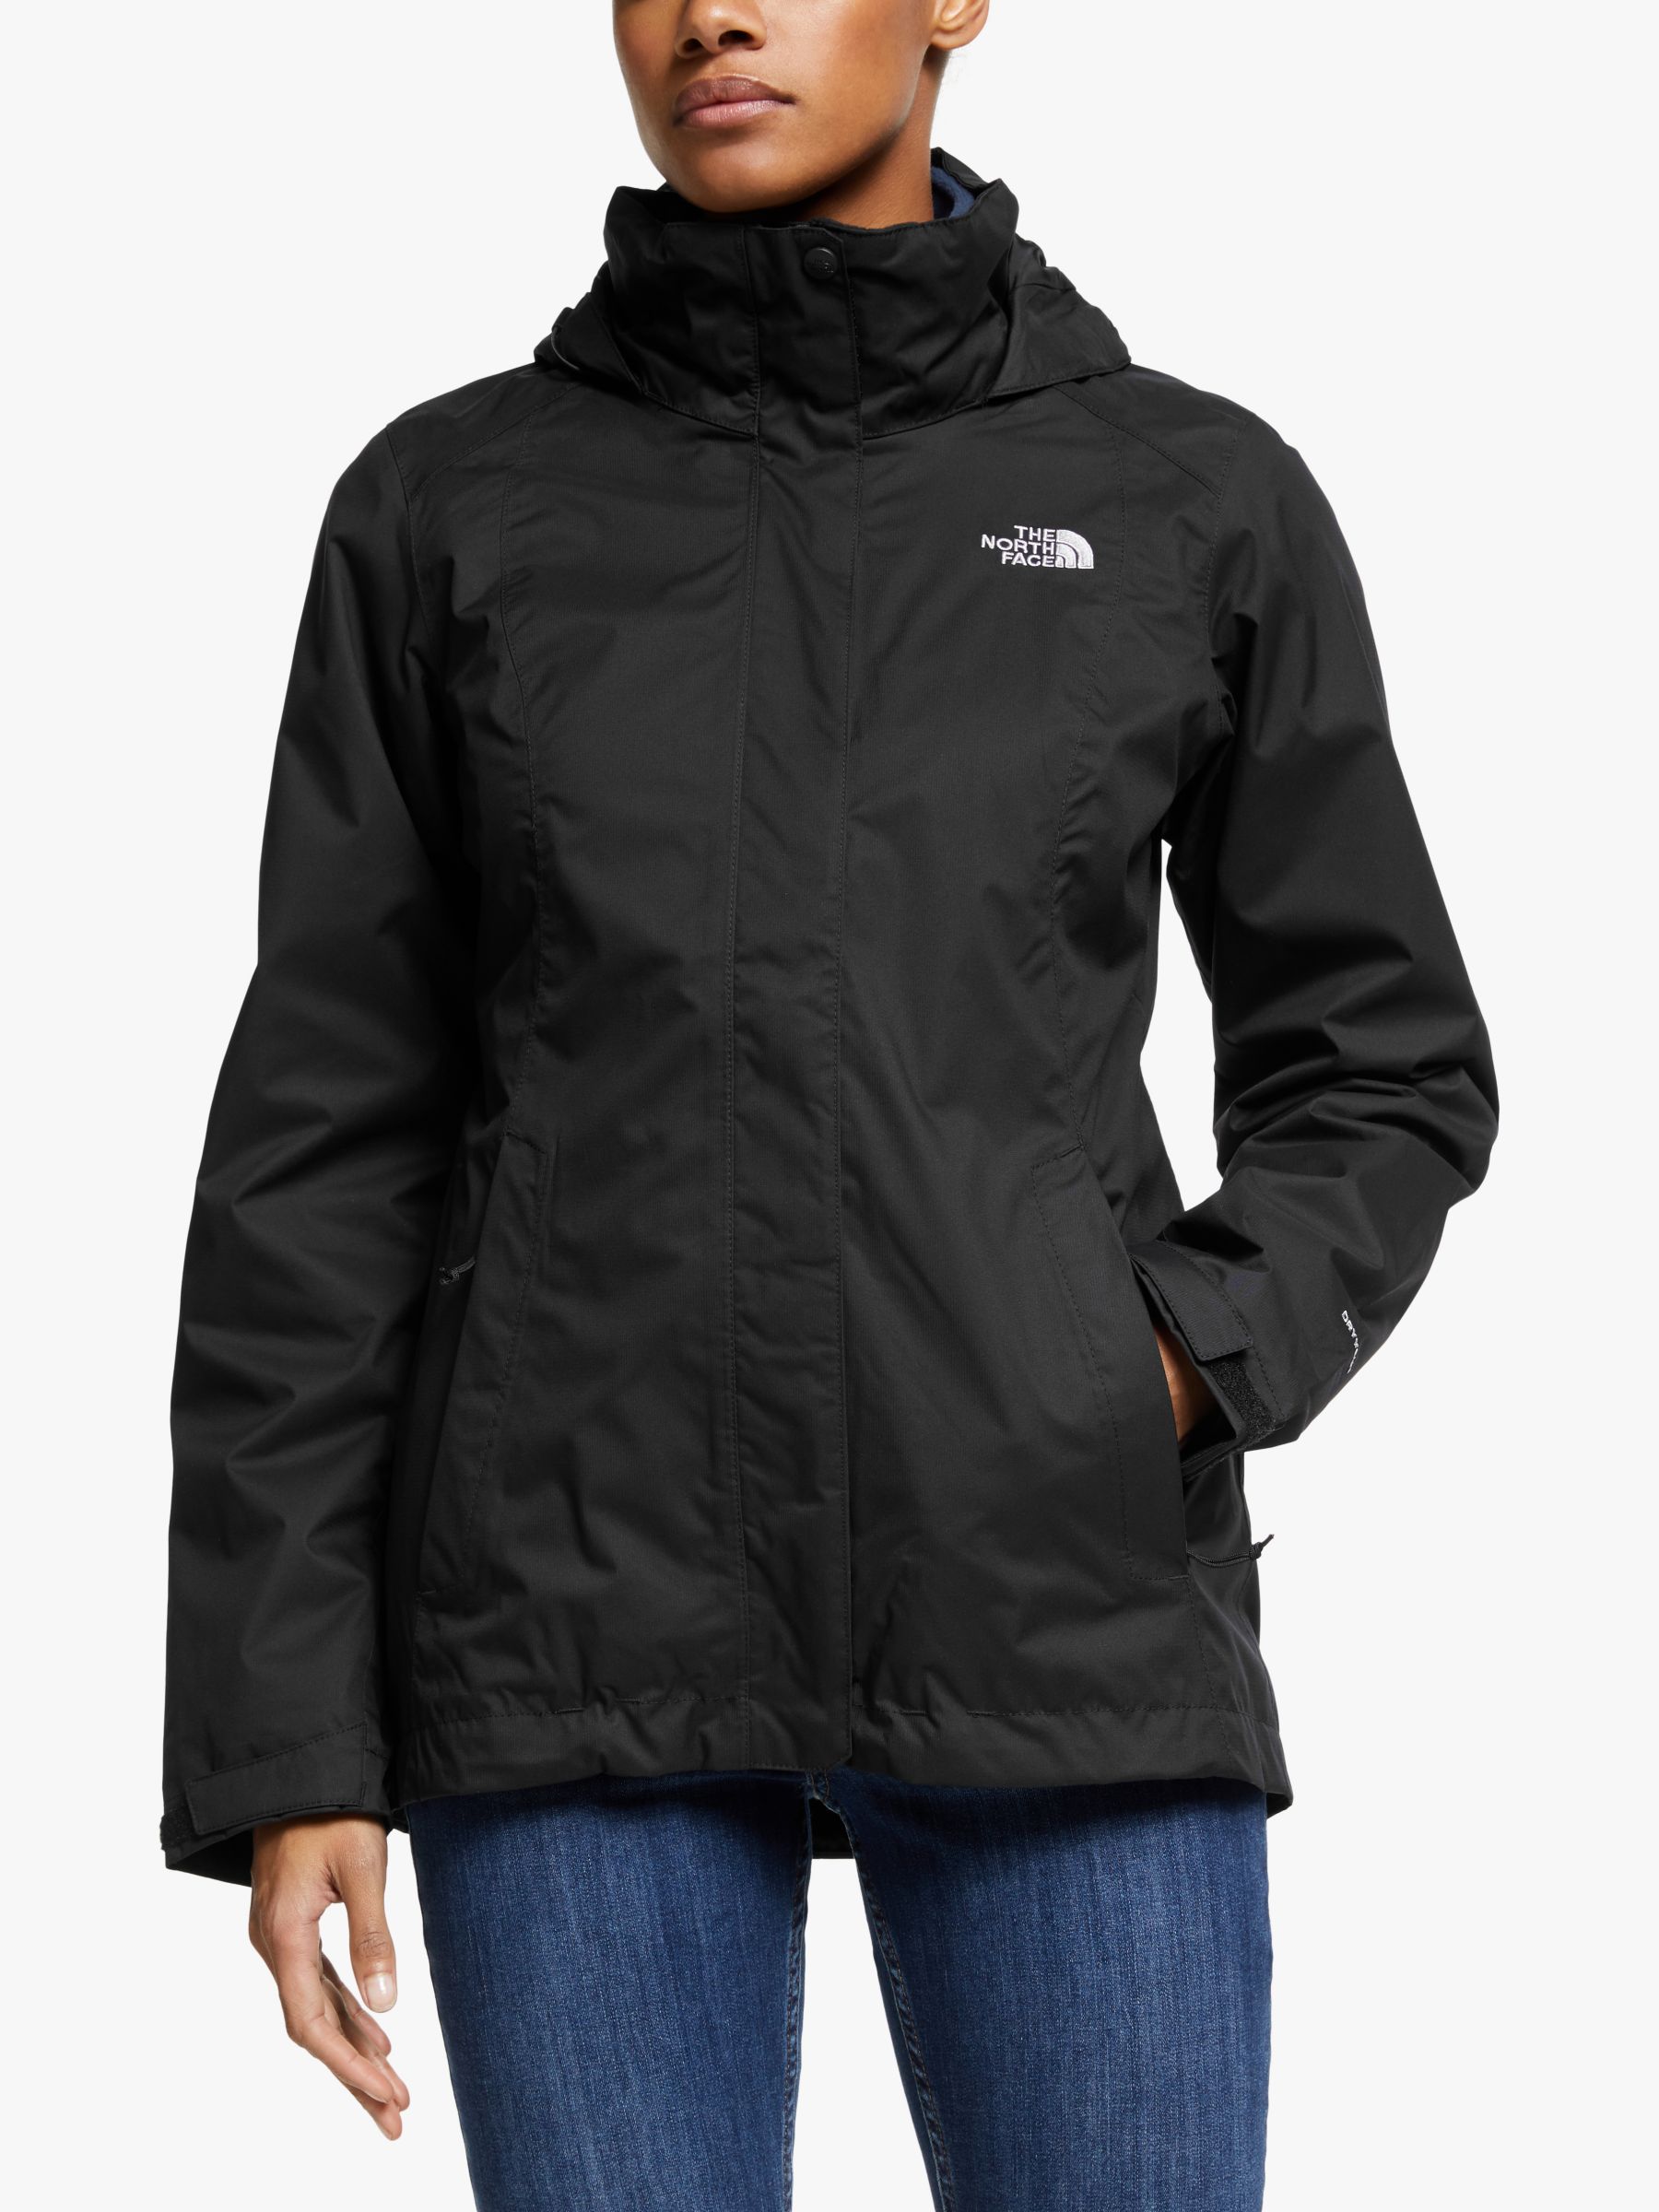 The North Face Evolve II Triclimate 3 